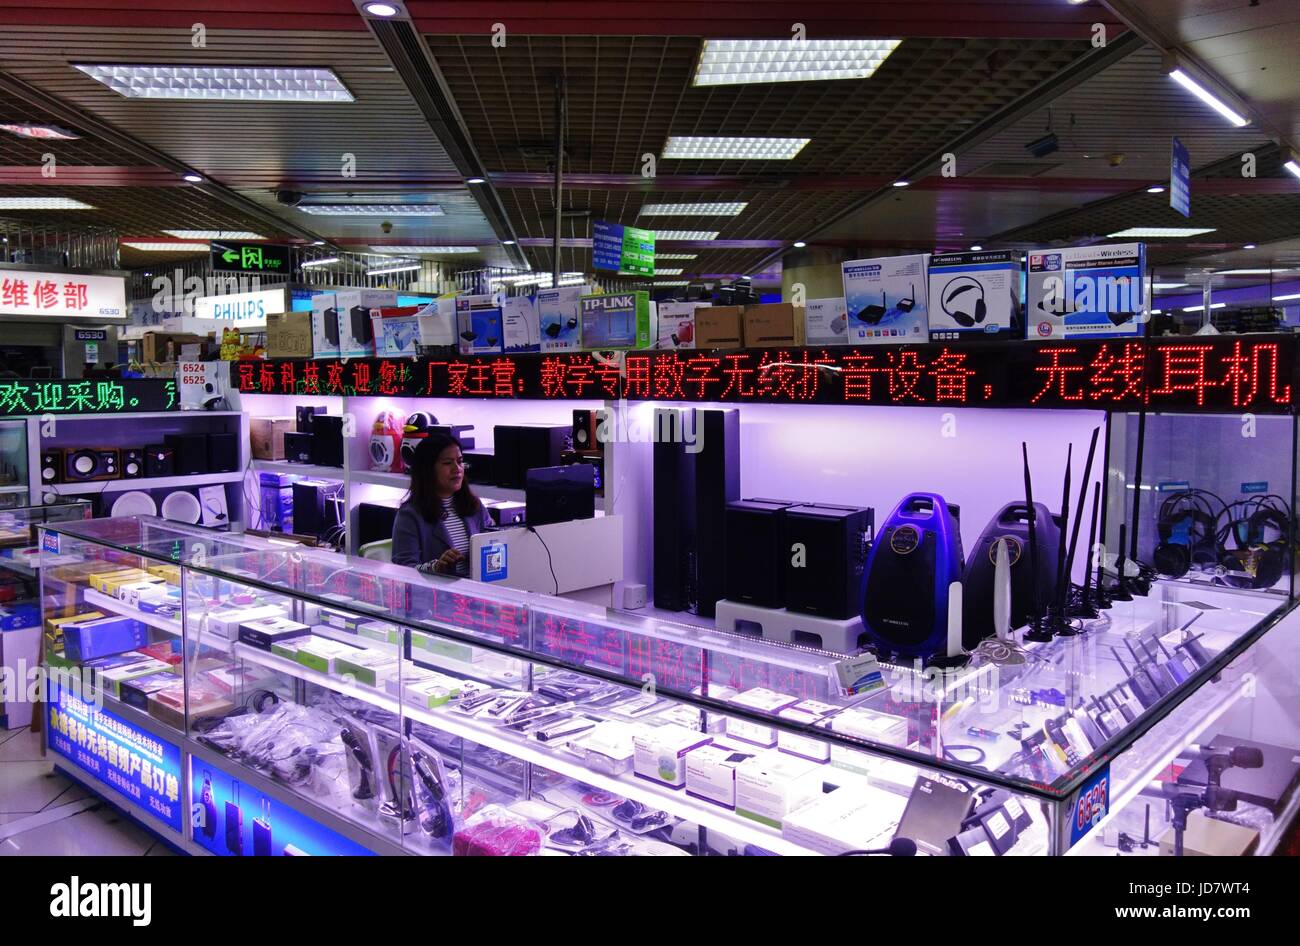 View of Huaqiangbei, the largest electronics market in the world, located in Shenzhen, People's Republic of China Stock Photo